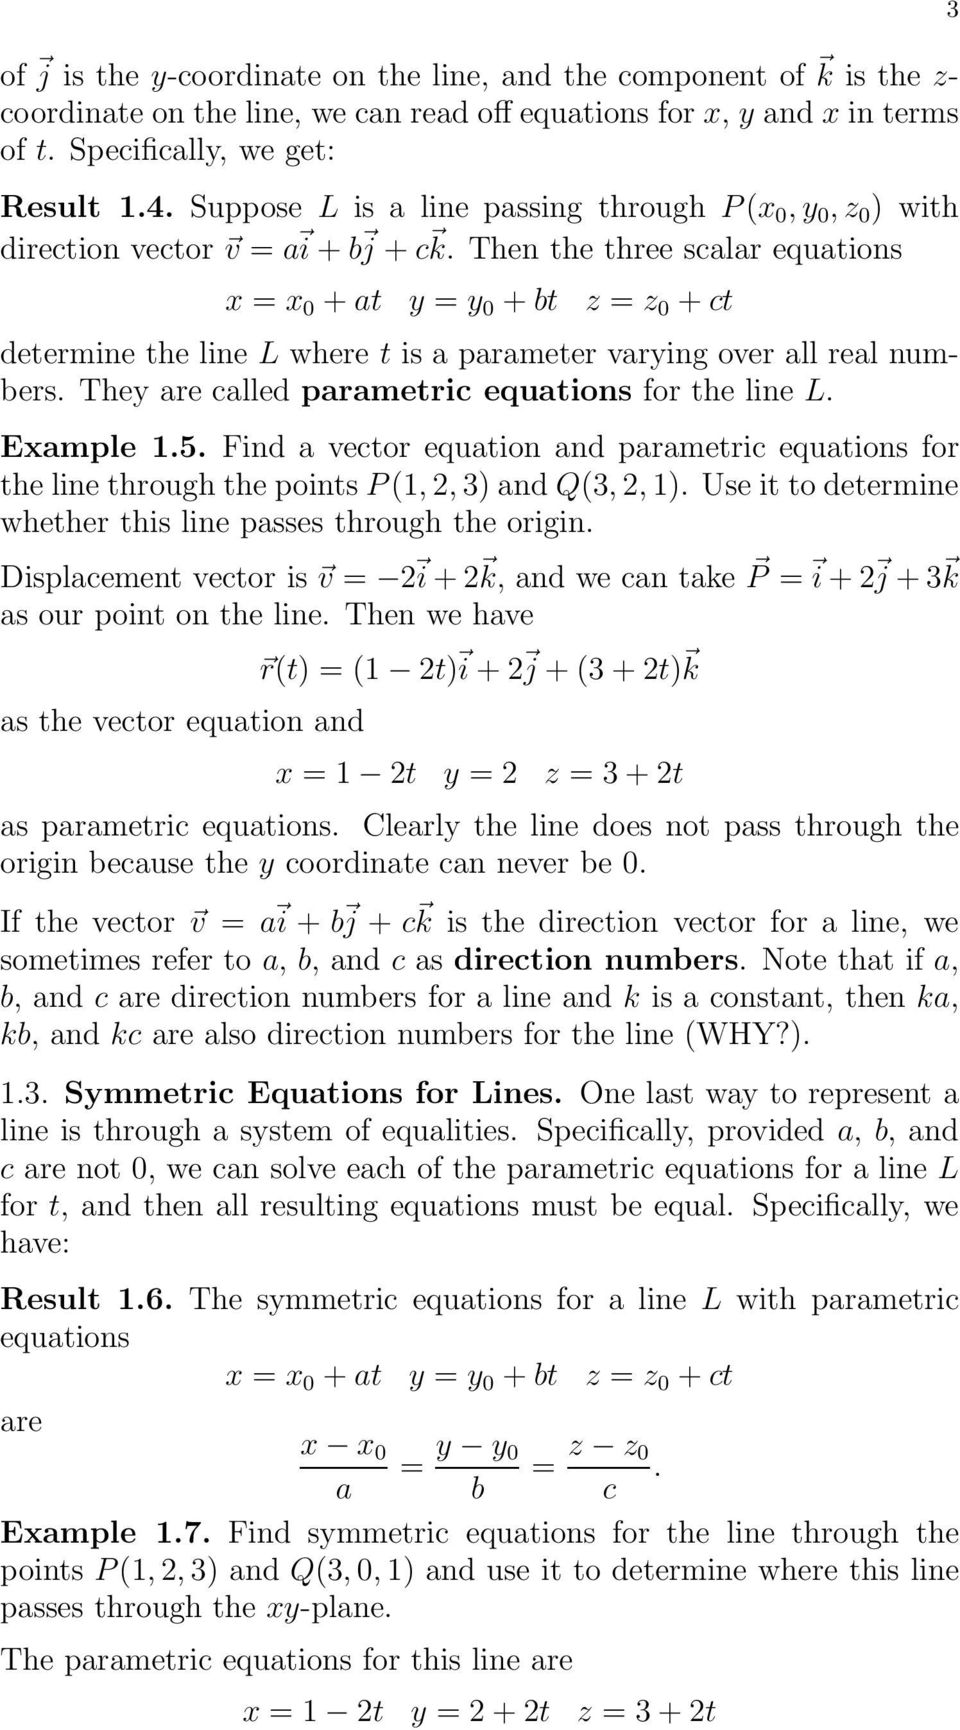 Then the three scalar equations x = x 0 + at y = y 0 + bt z = z 0 + ct determine the line L where t is a parameter varying over all real numbers. They are called parametric equations for the line L.